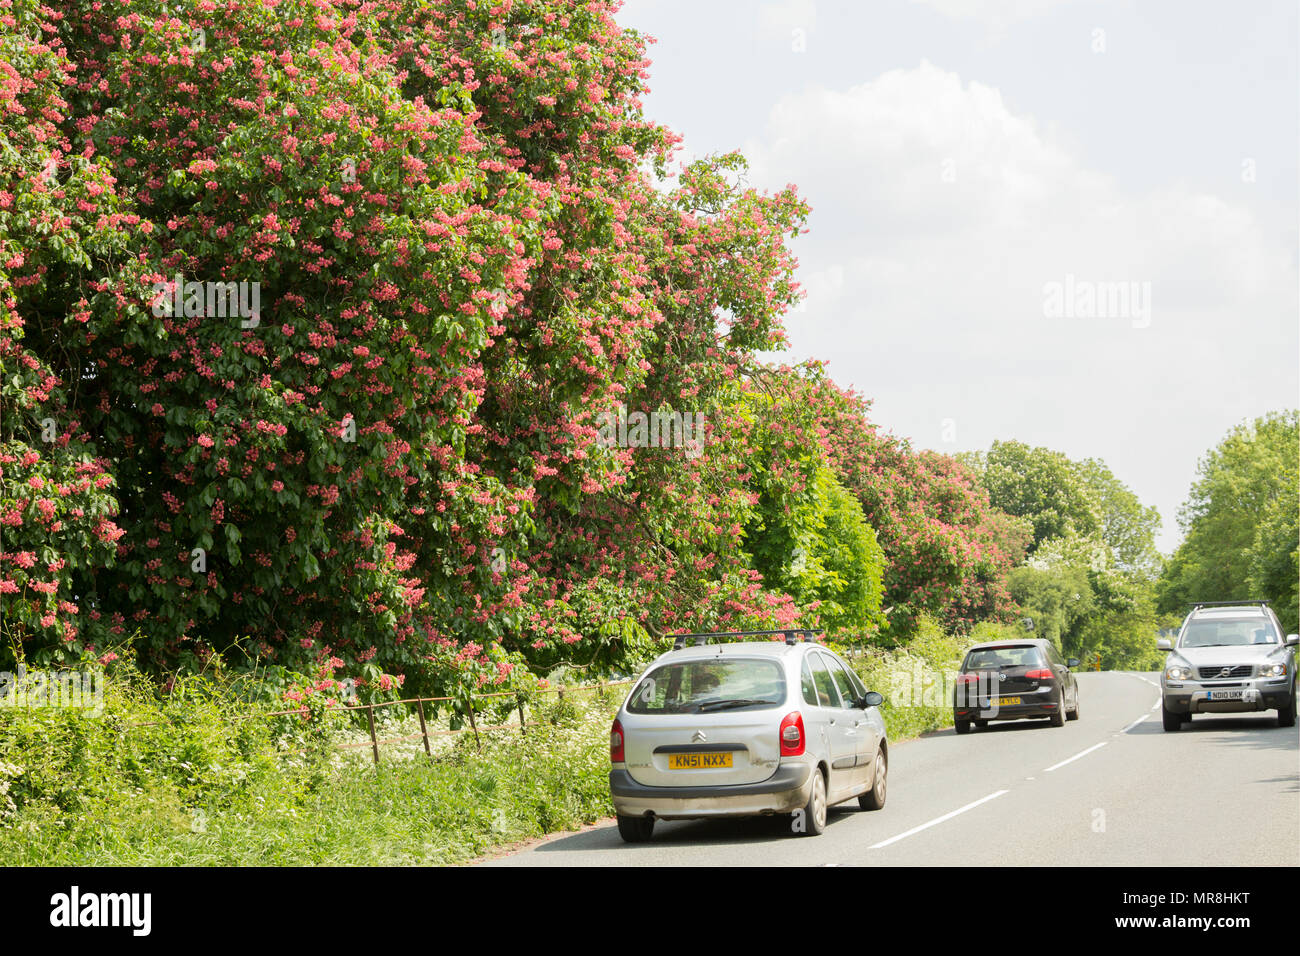 Red horse-chestnut, Aesculus x Carnea, growing along the side of a country road in Somerset England UK GB. Red horse-chestnut is a hybrid between hors Stock Photo